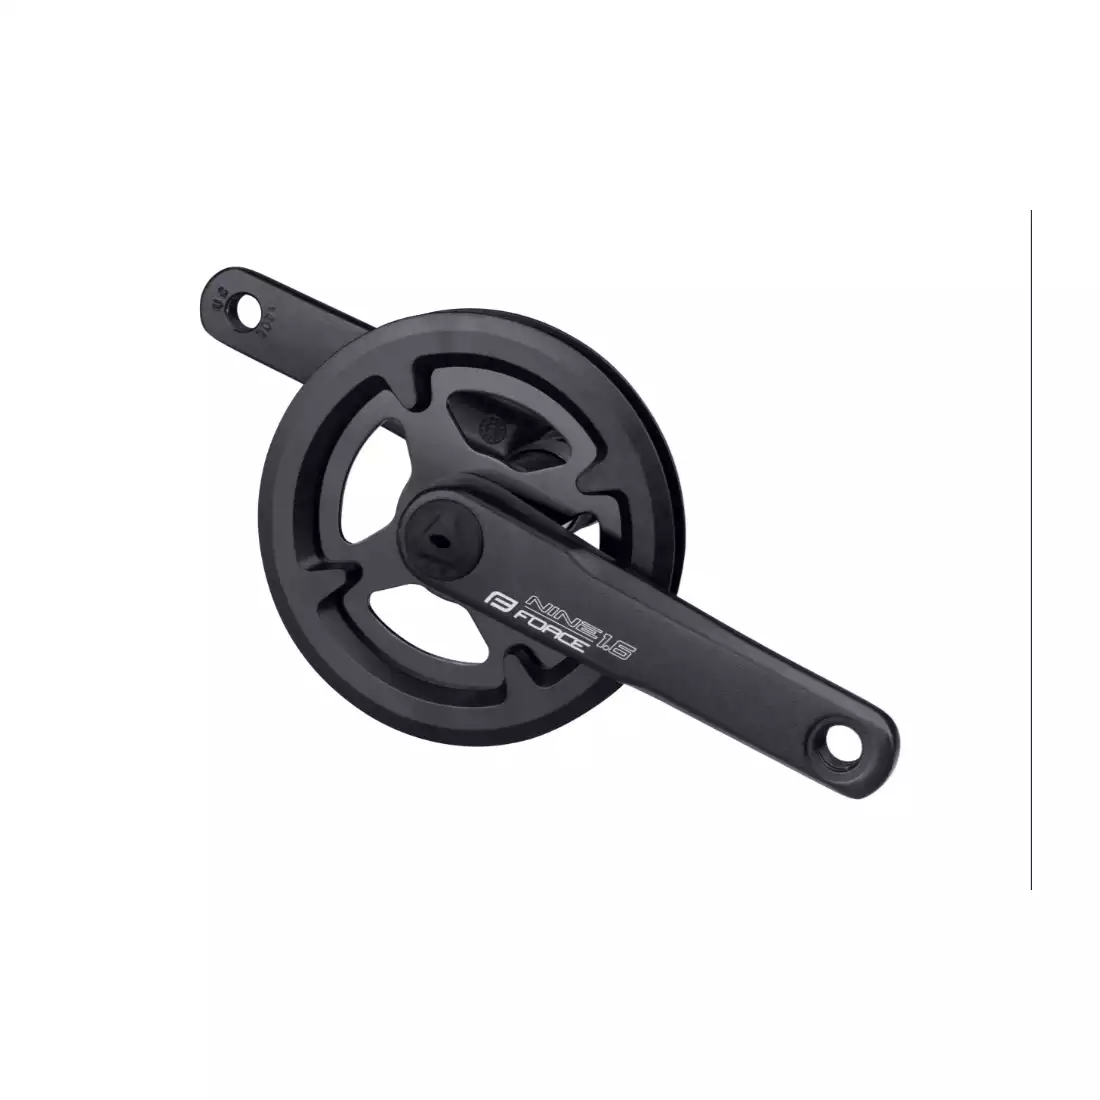 FORCE NINE 1.6 bicycle crank with guard 30T/140 mm aluminum black